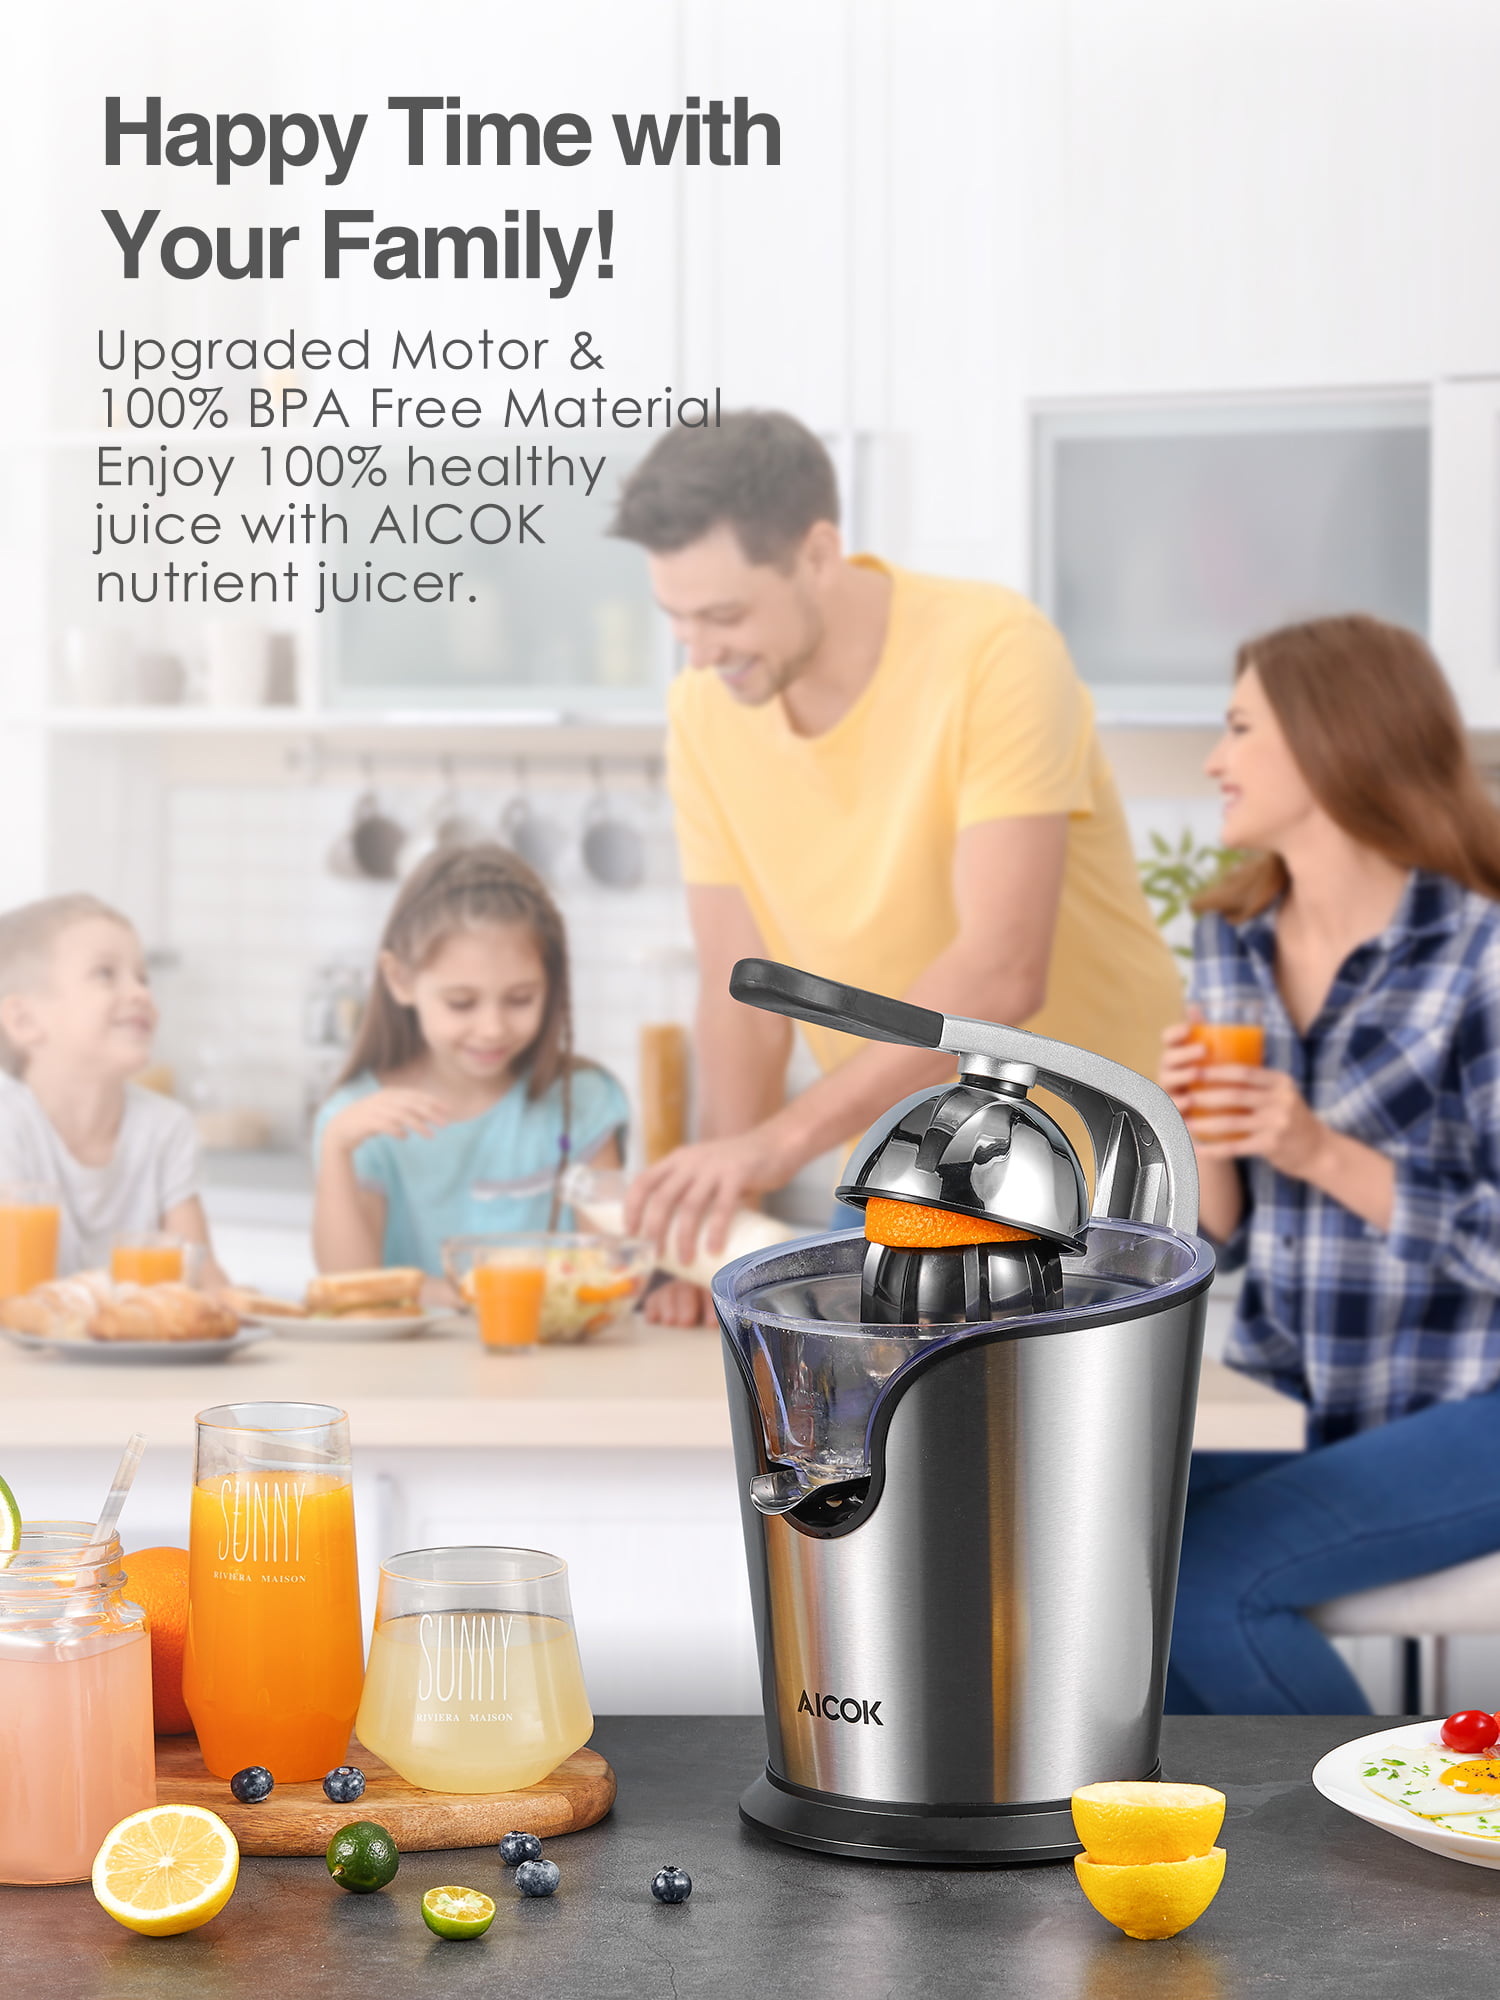 AICOK Orange Juicer Electric Citrus Juicer with Humanized Handle Powerful 160W Silent Motor Stainless Steel BPA-Free,Double Size Cones,Silver 